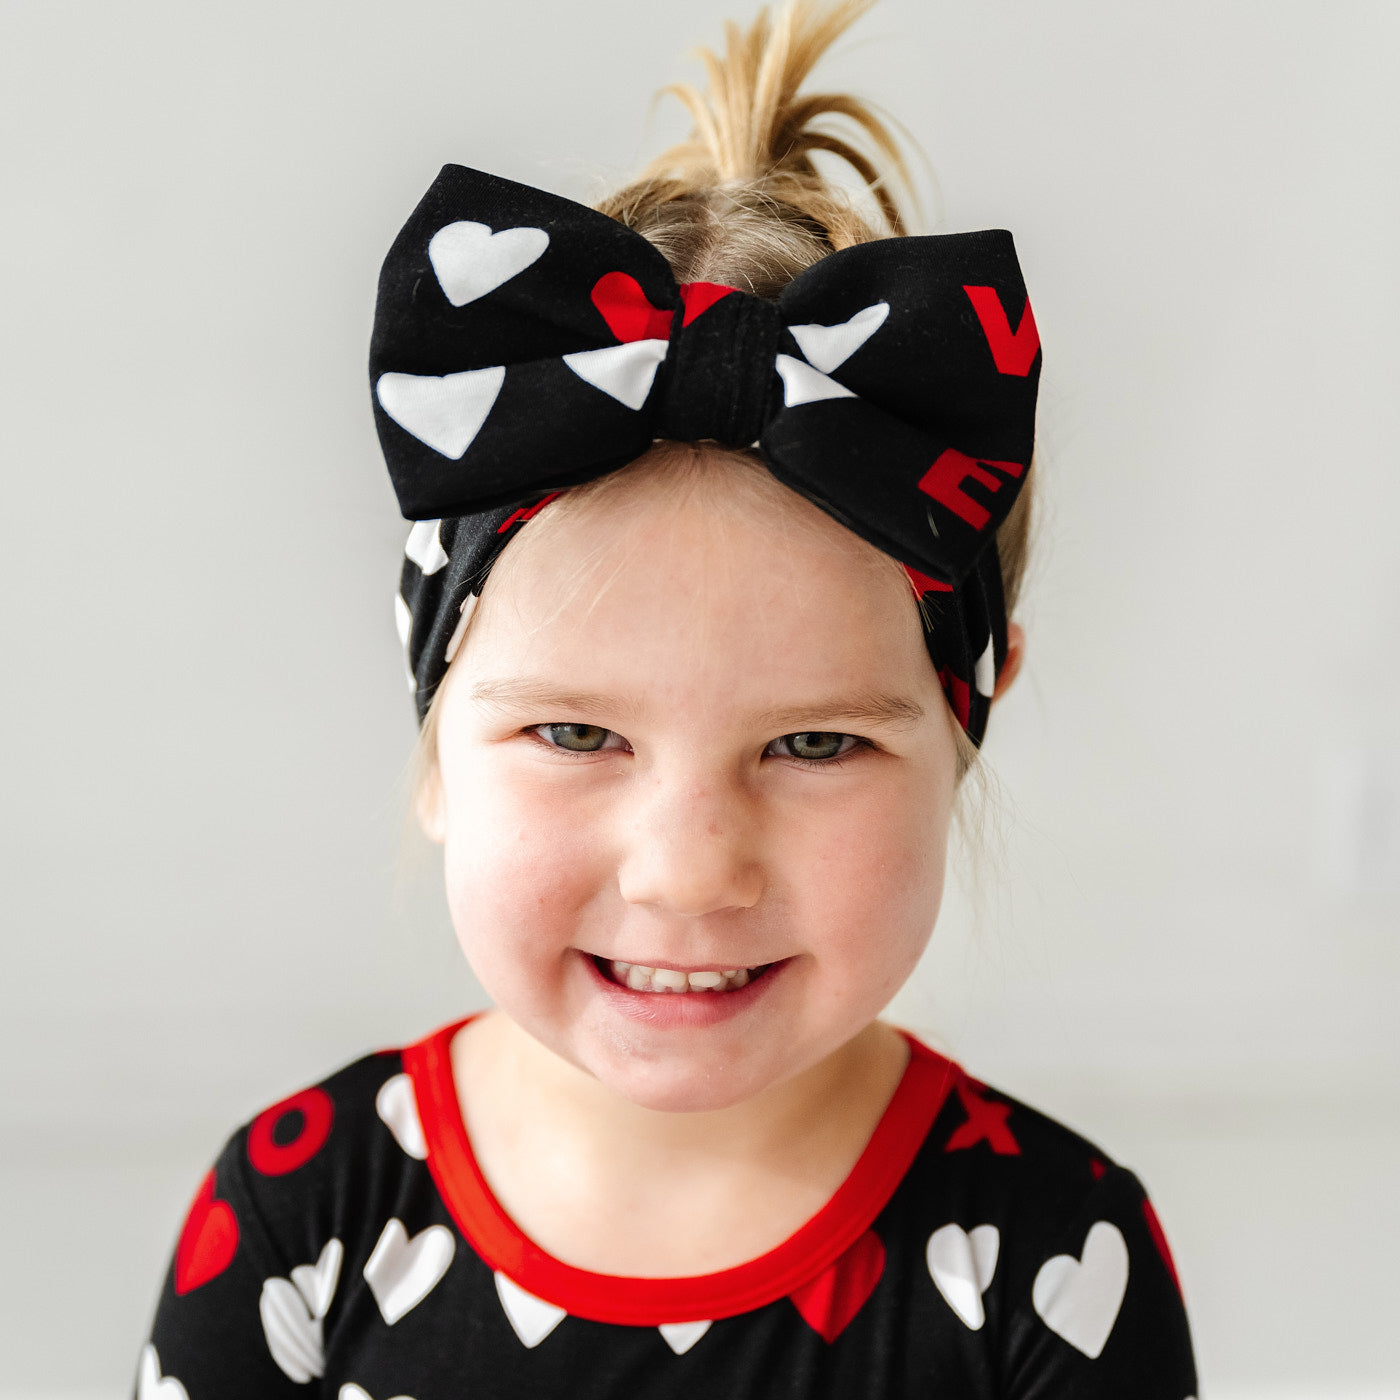 Third alternate close up image of a child wearing a Black XOXO luxe bow headband and matching zippy